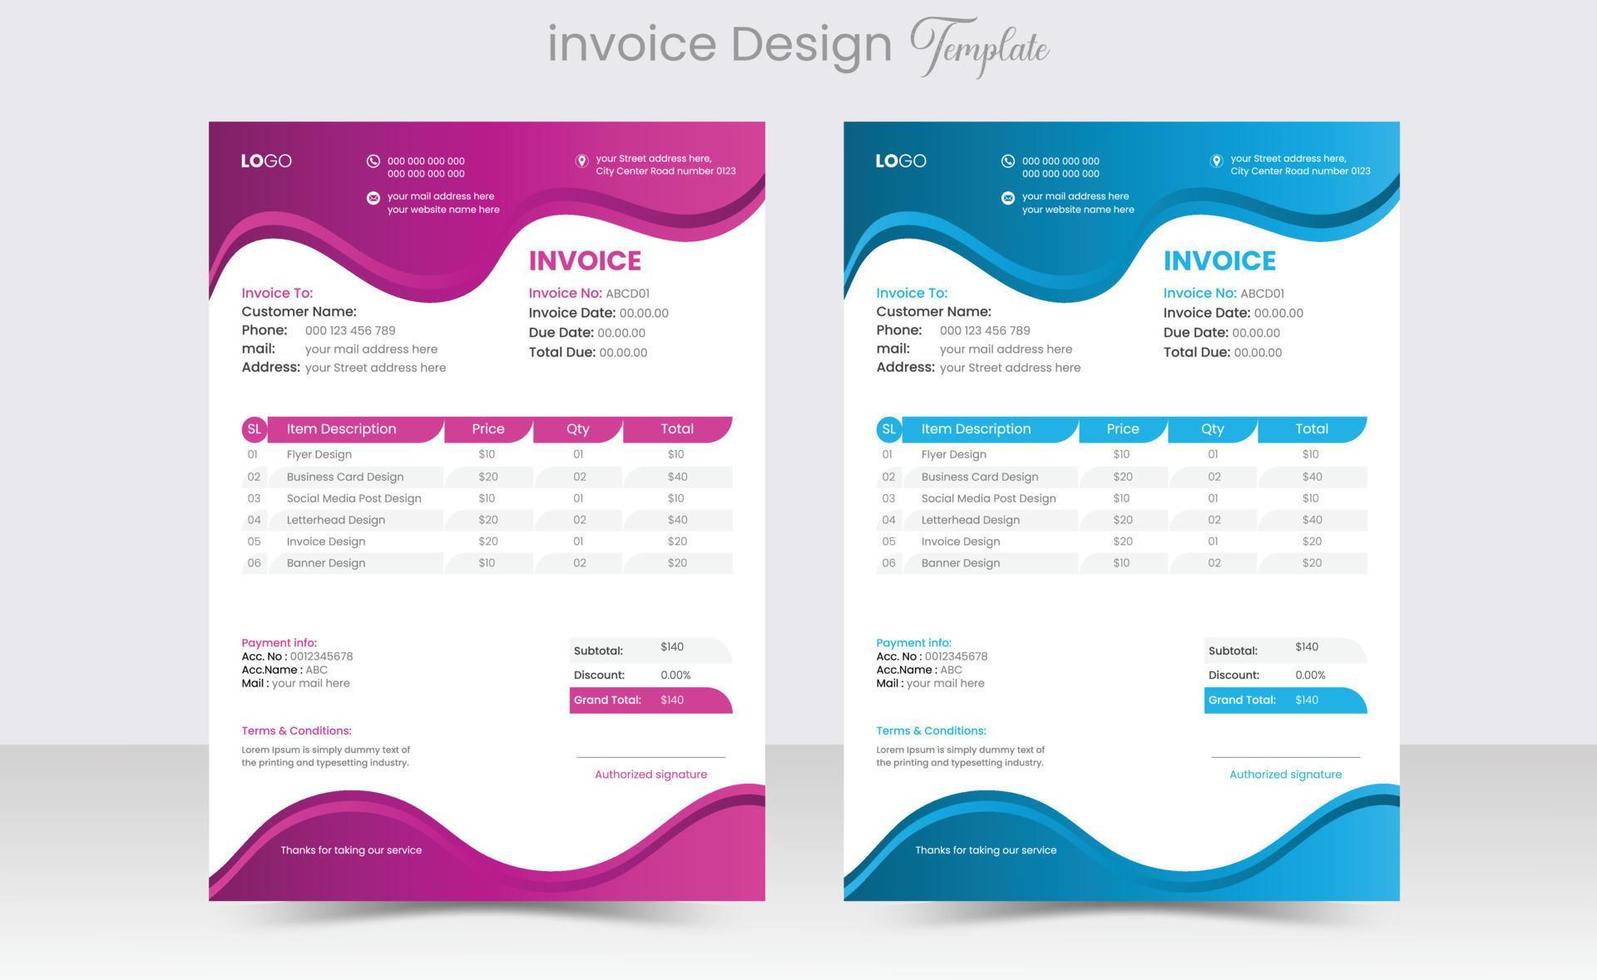 Minimal Corporate Business Invoice design for the corporate office. Invoicing quotes, money bills or price invoices, and payment agreement design templates Creative invoice Template vector